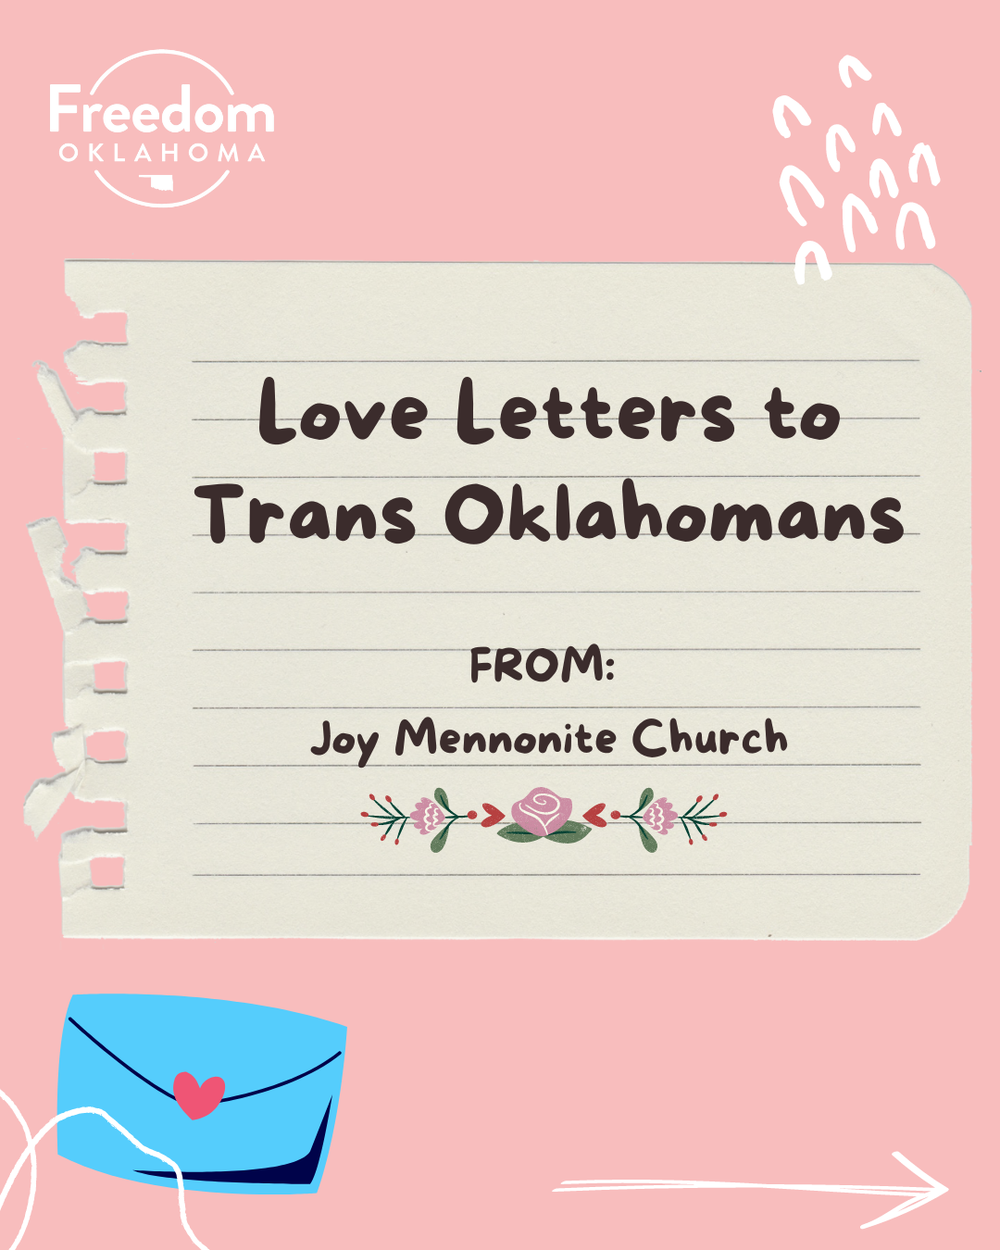  Pink background with a piece of paper in the center with text: Love Letters to Trans Oklahomans FROM: Joy Mennonite Church." There is a blue cartoon envelope, random designs, and an arrow pointing right. 